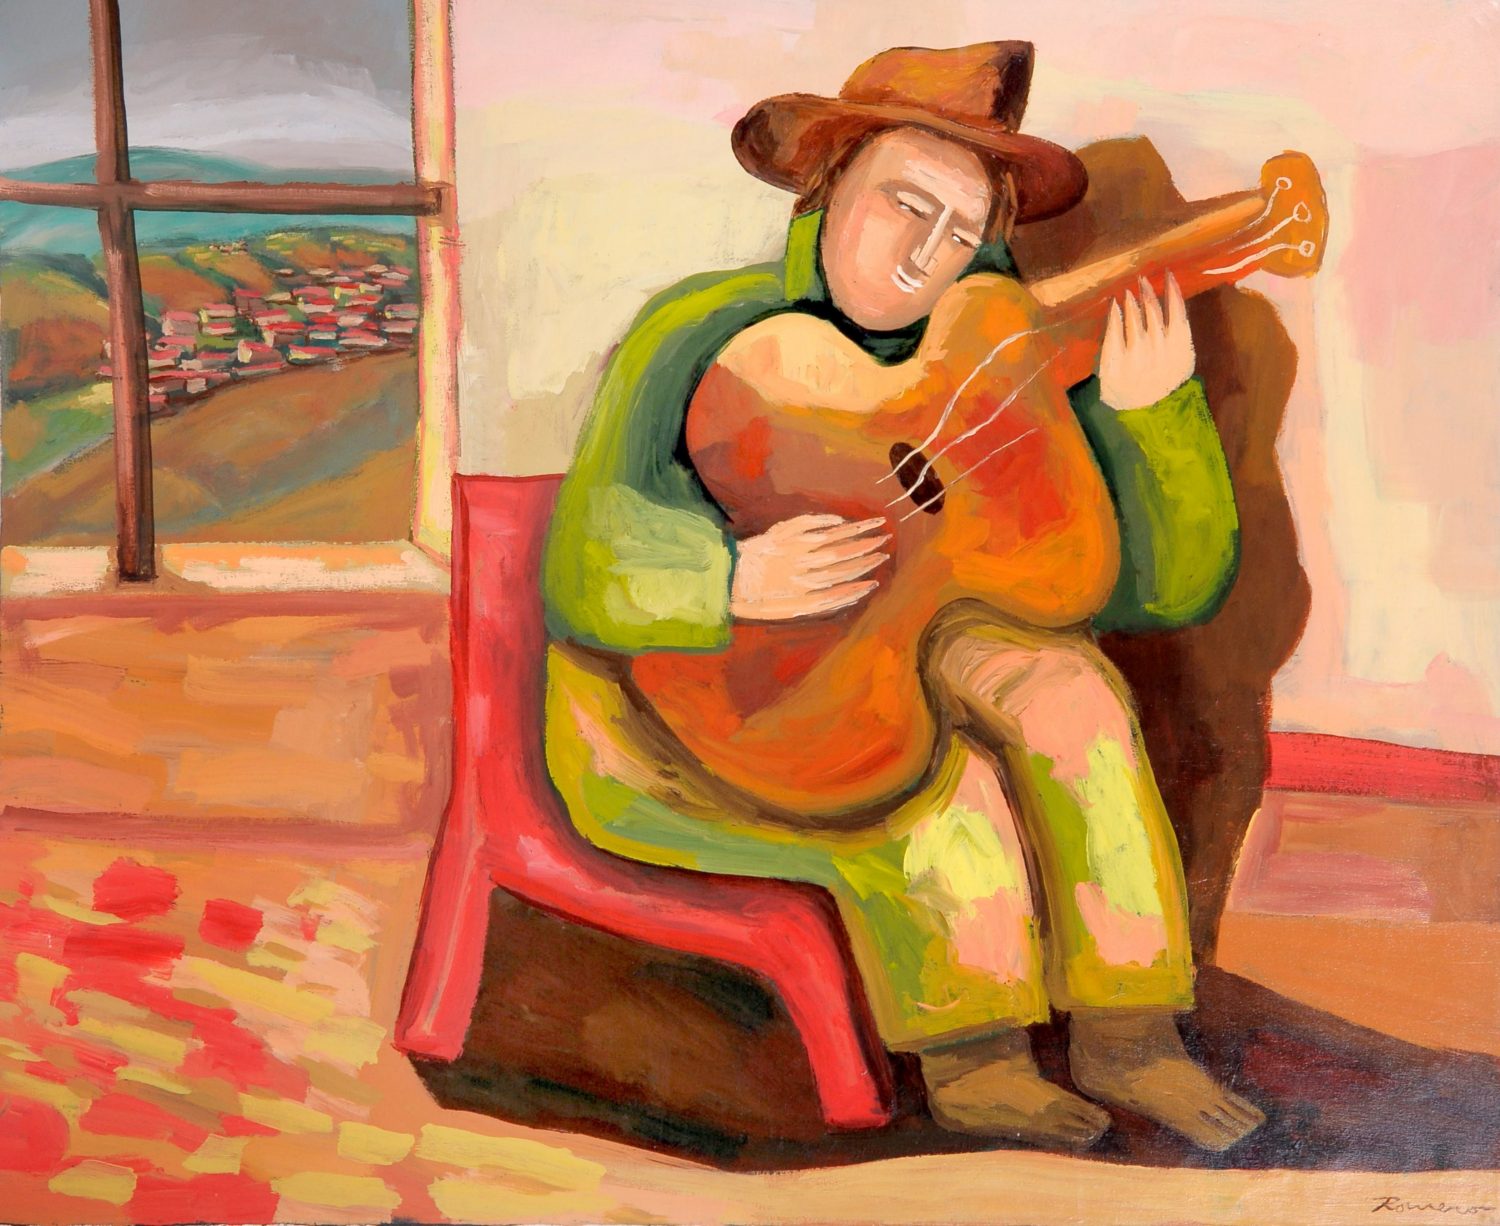 thumbnail of Memories and experiences in the countryside by Ecuadorian artist Jaime Romero. medium: mixed media on canvas. Dimensions: 31.5 x 39 inches. date: 2005